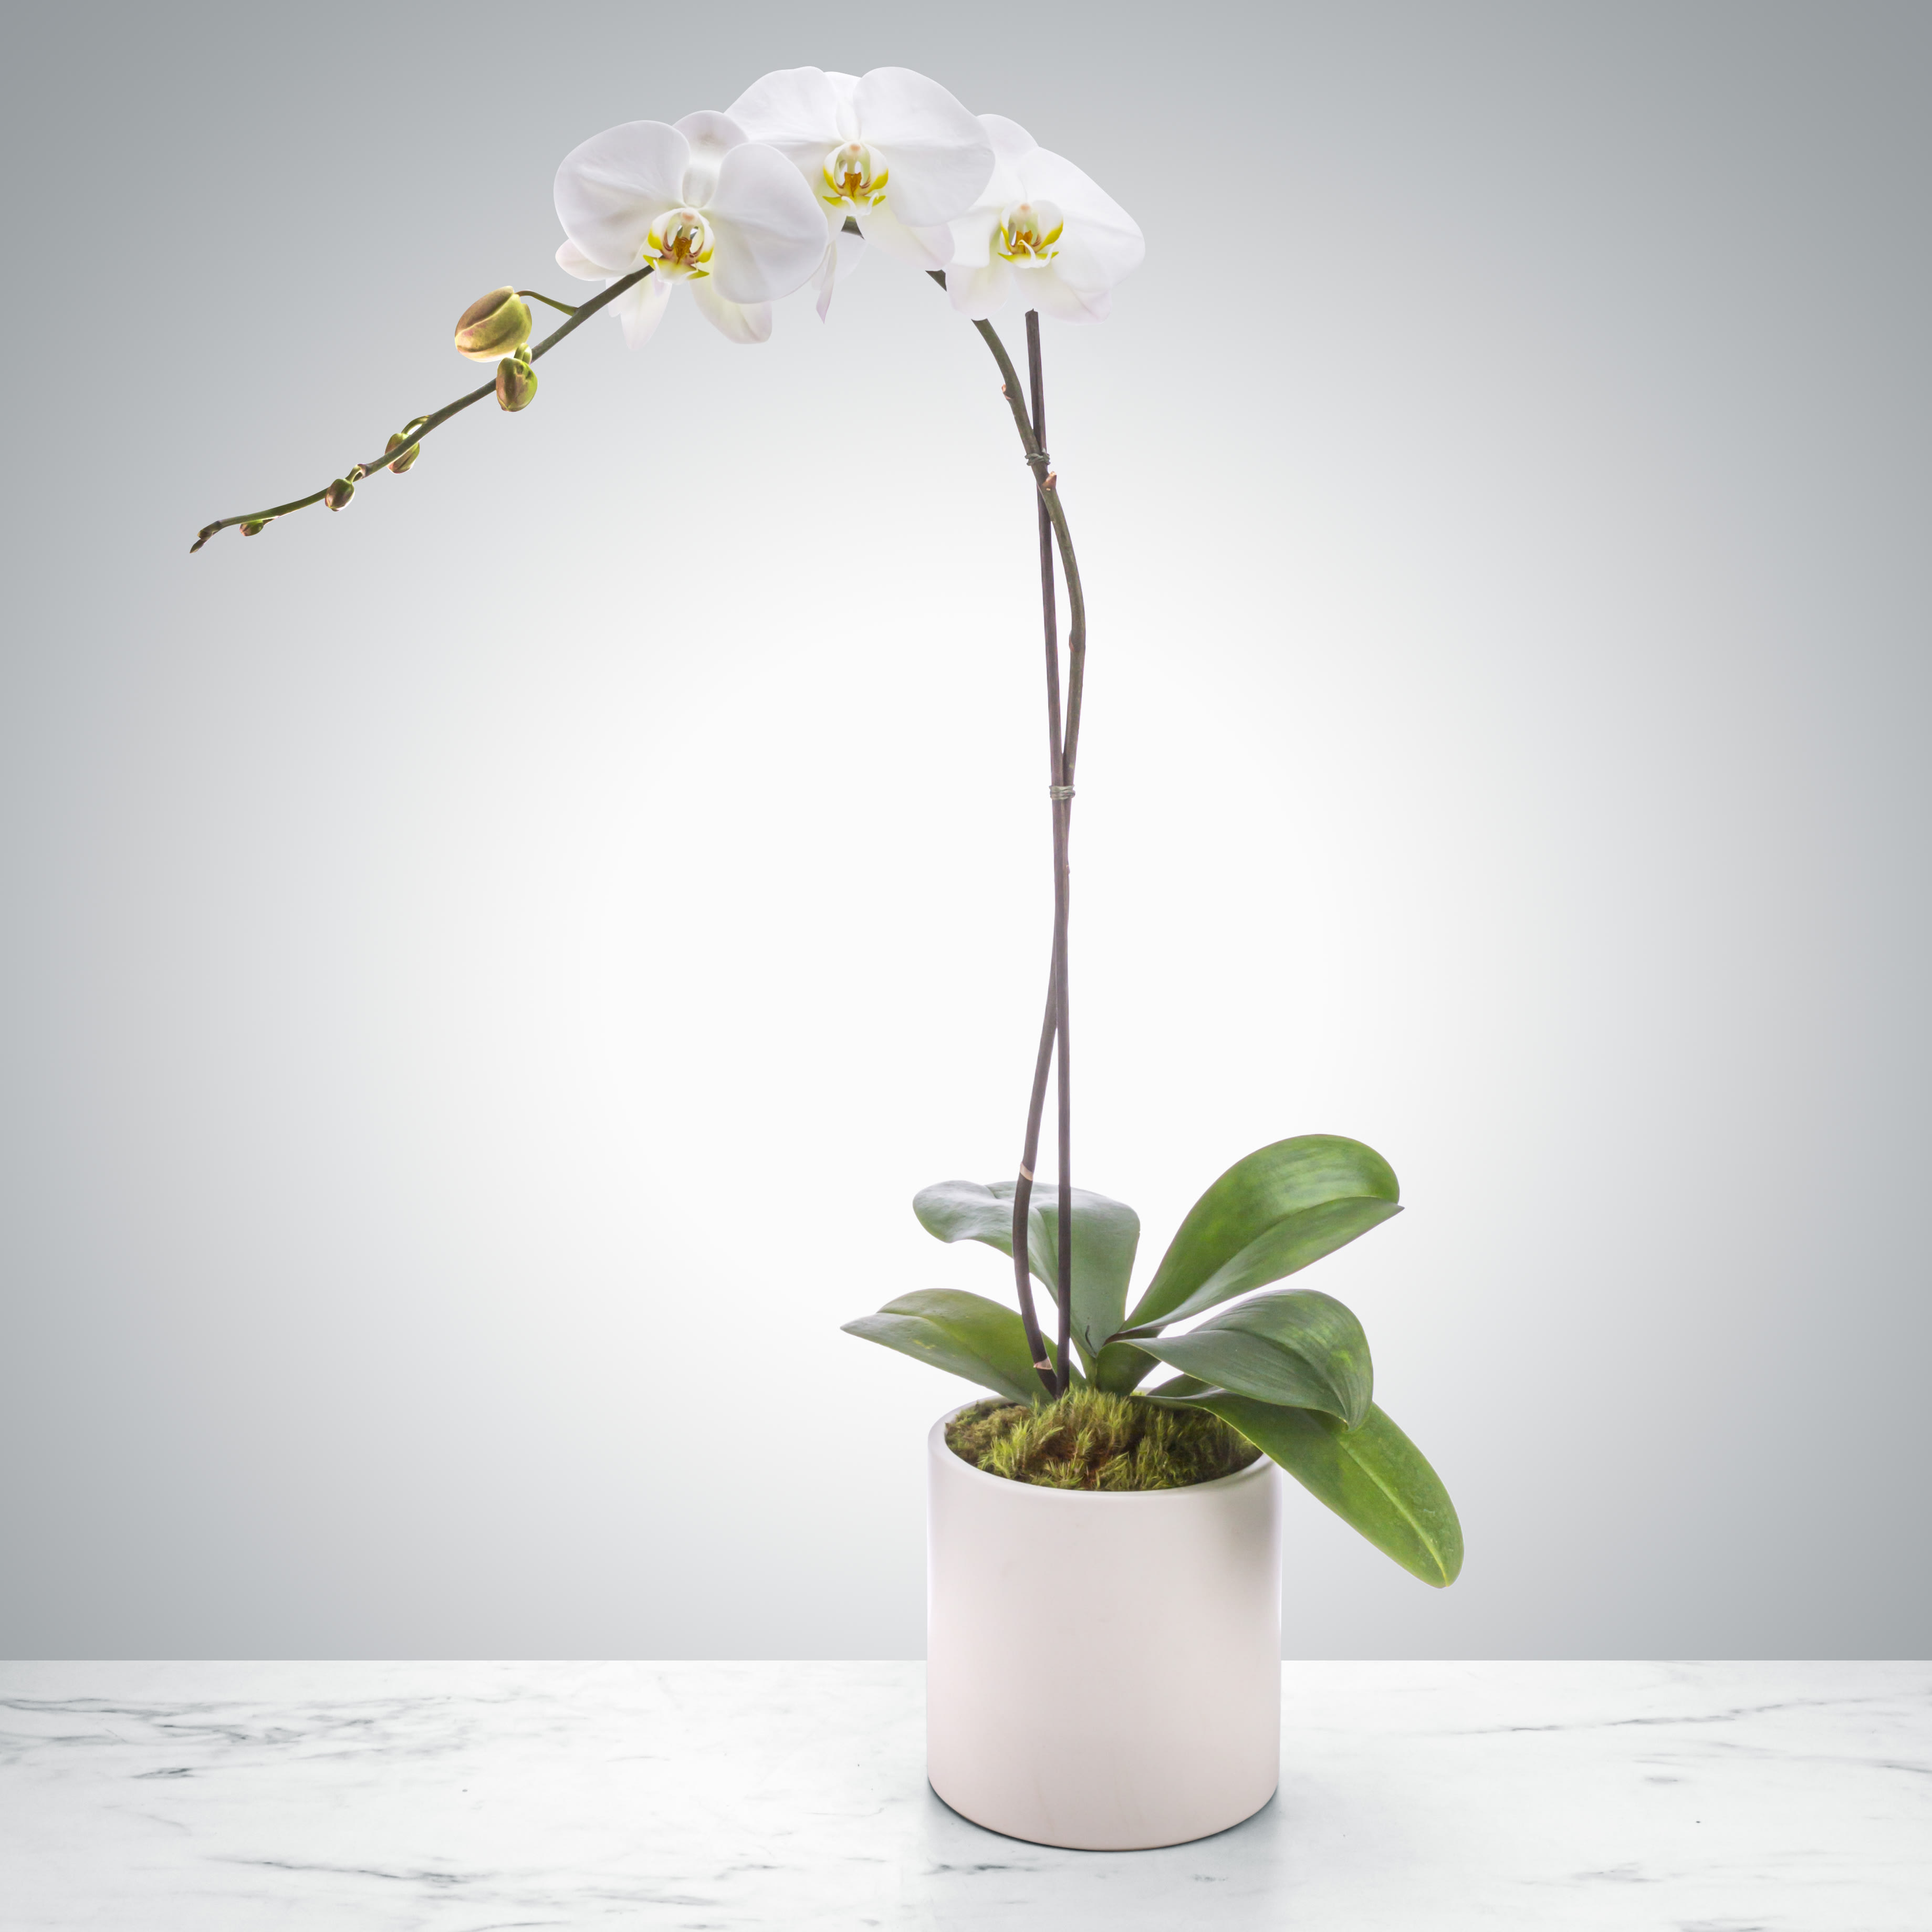 Single Stem Orchid by BloomNation™ - A beautiful and classic single stem white orchid. Perfect for all occasions, bring it as a housewarming gift, a birthday, or anything in-between.